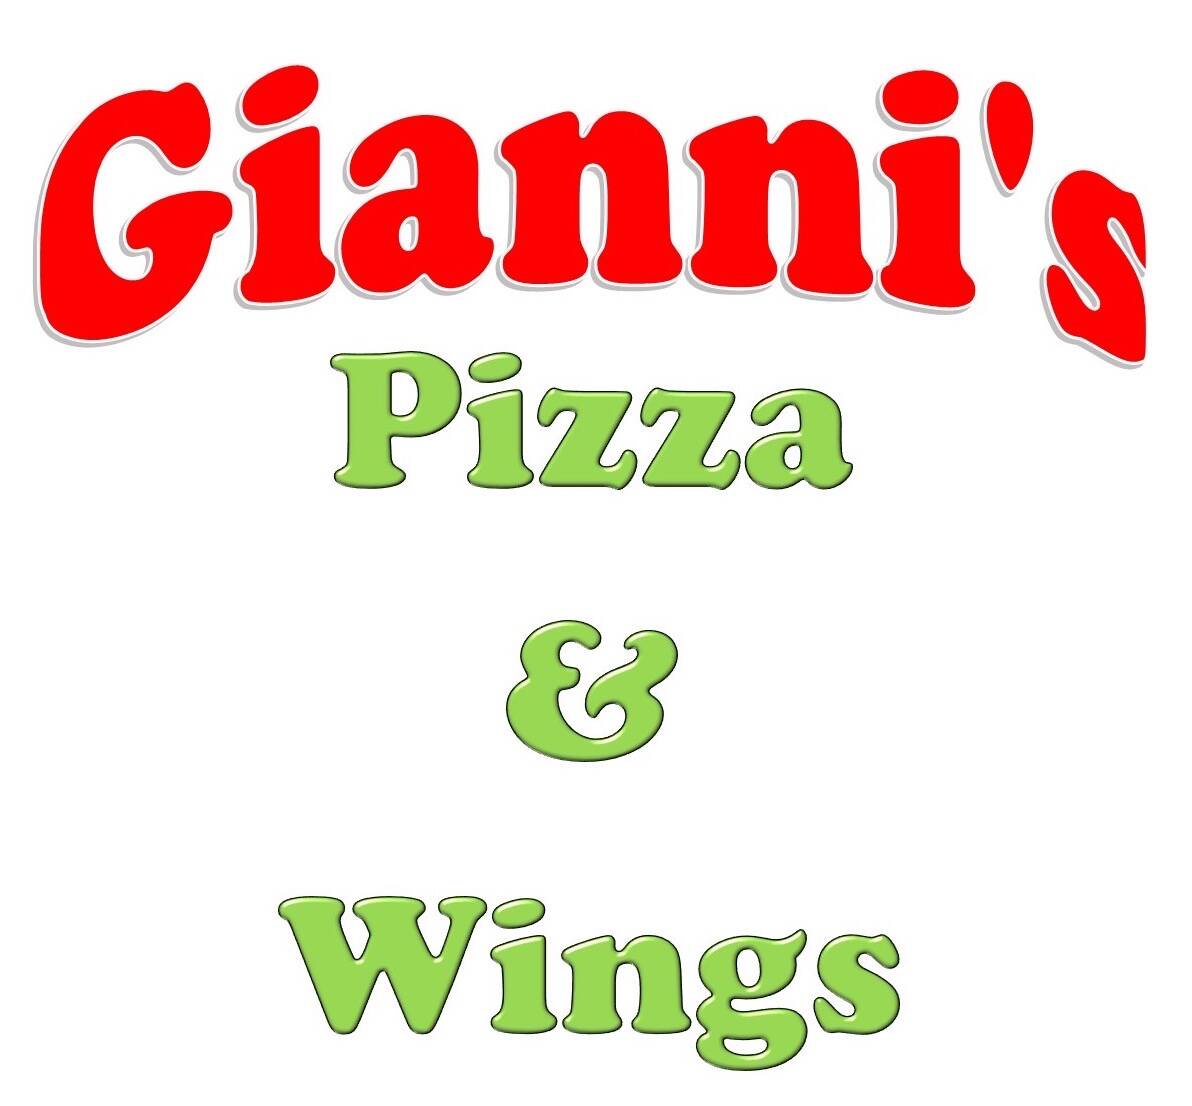 2 Silver - Gianni's Pizza & Wings